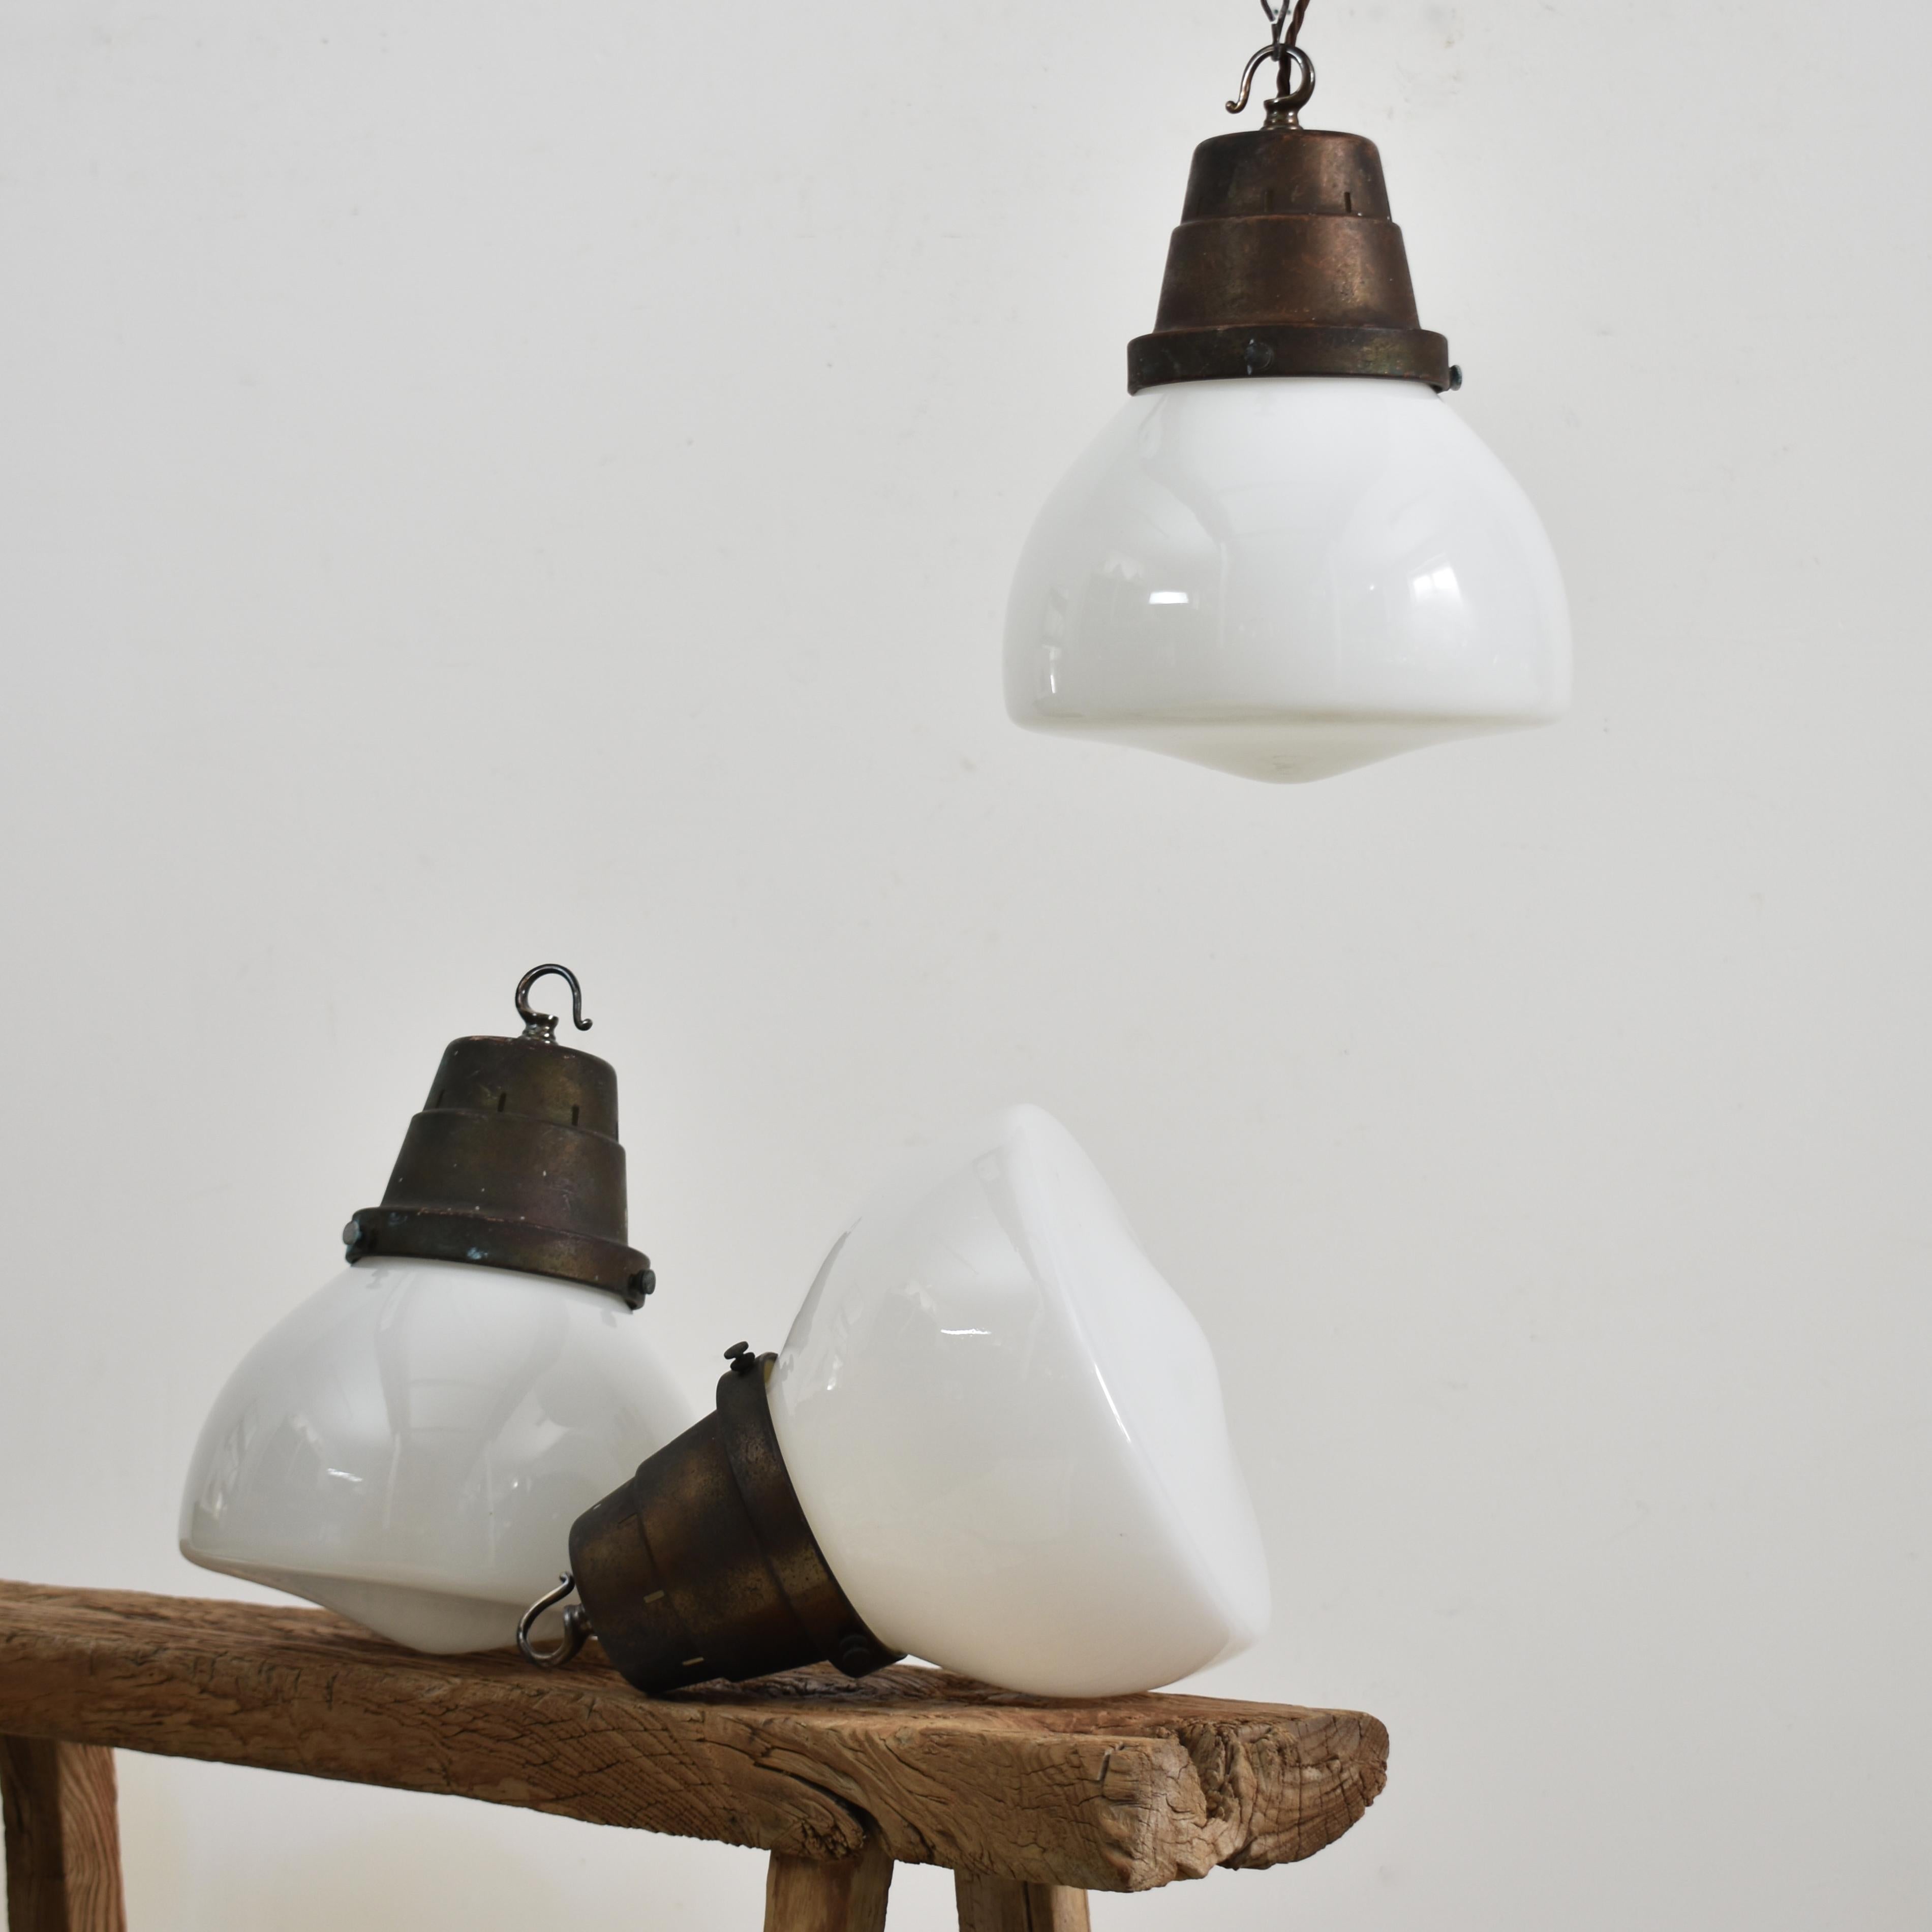 Antique Church Opaline pendant light – R

An original opaline glass pendant light. The light has a milk glass opaline shade and original brass hanging gallery. The gallery finish has been left untouched in it original